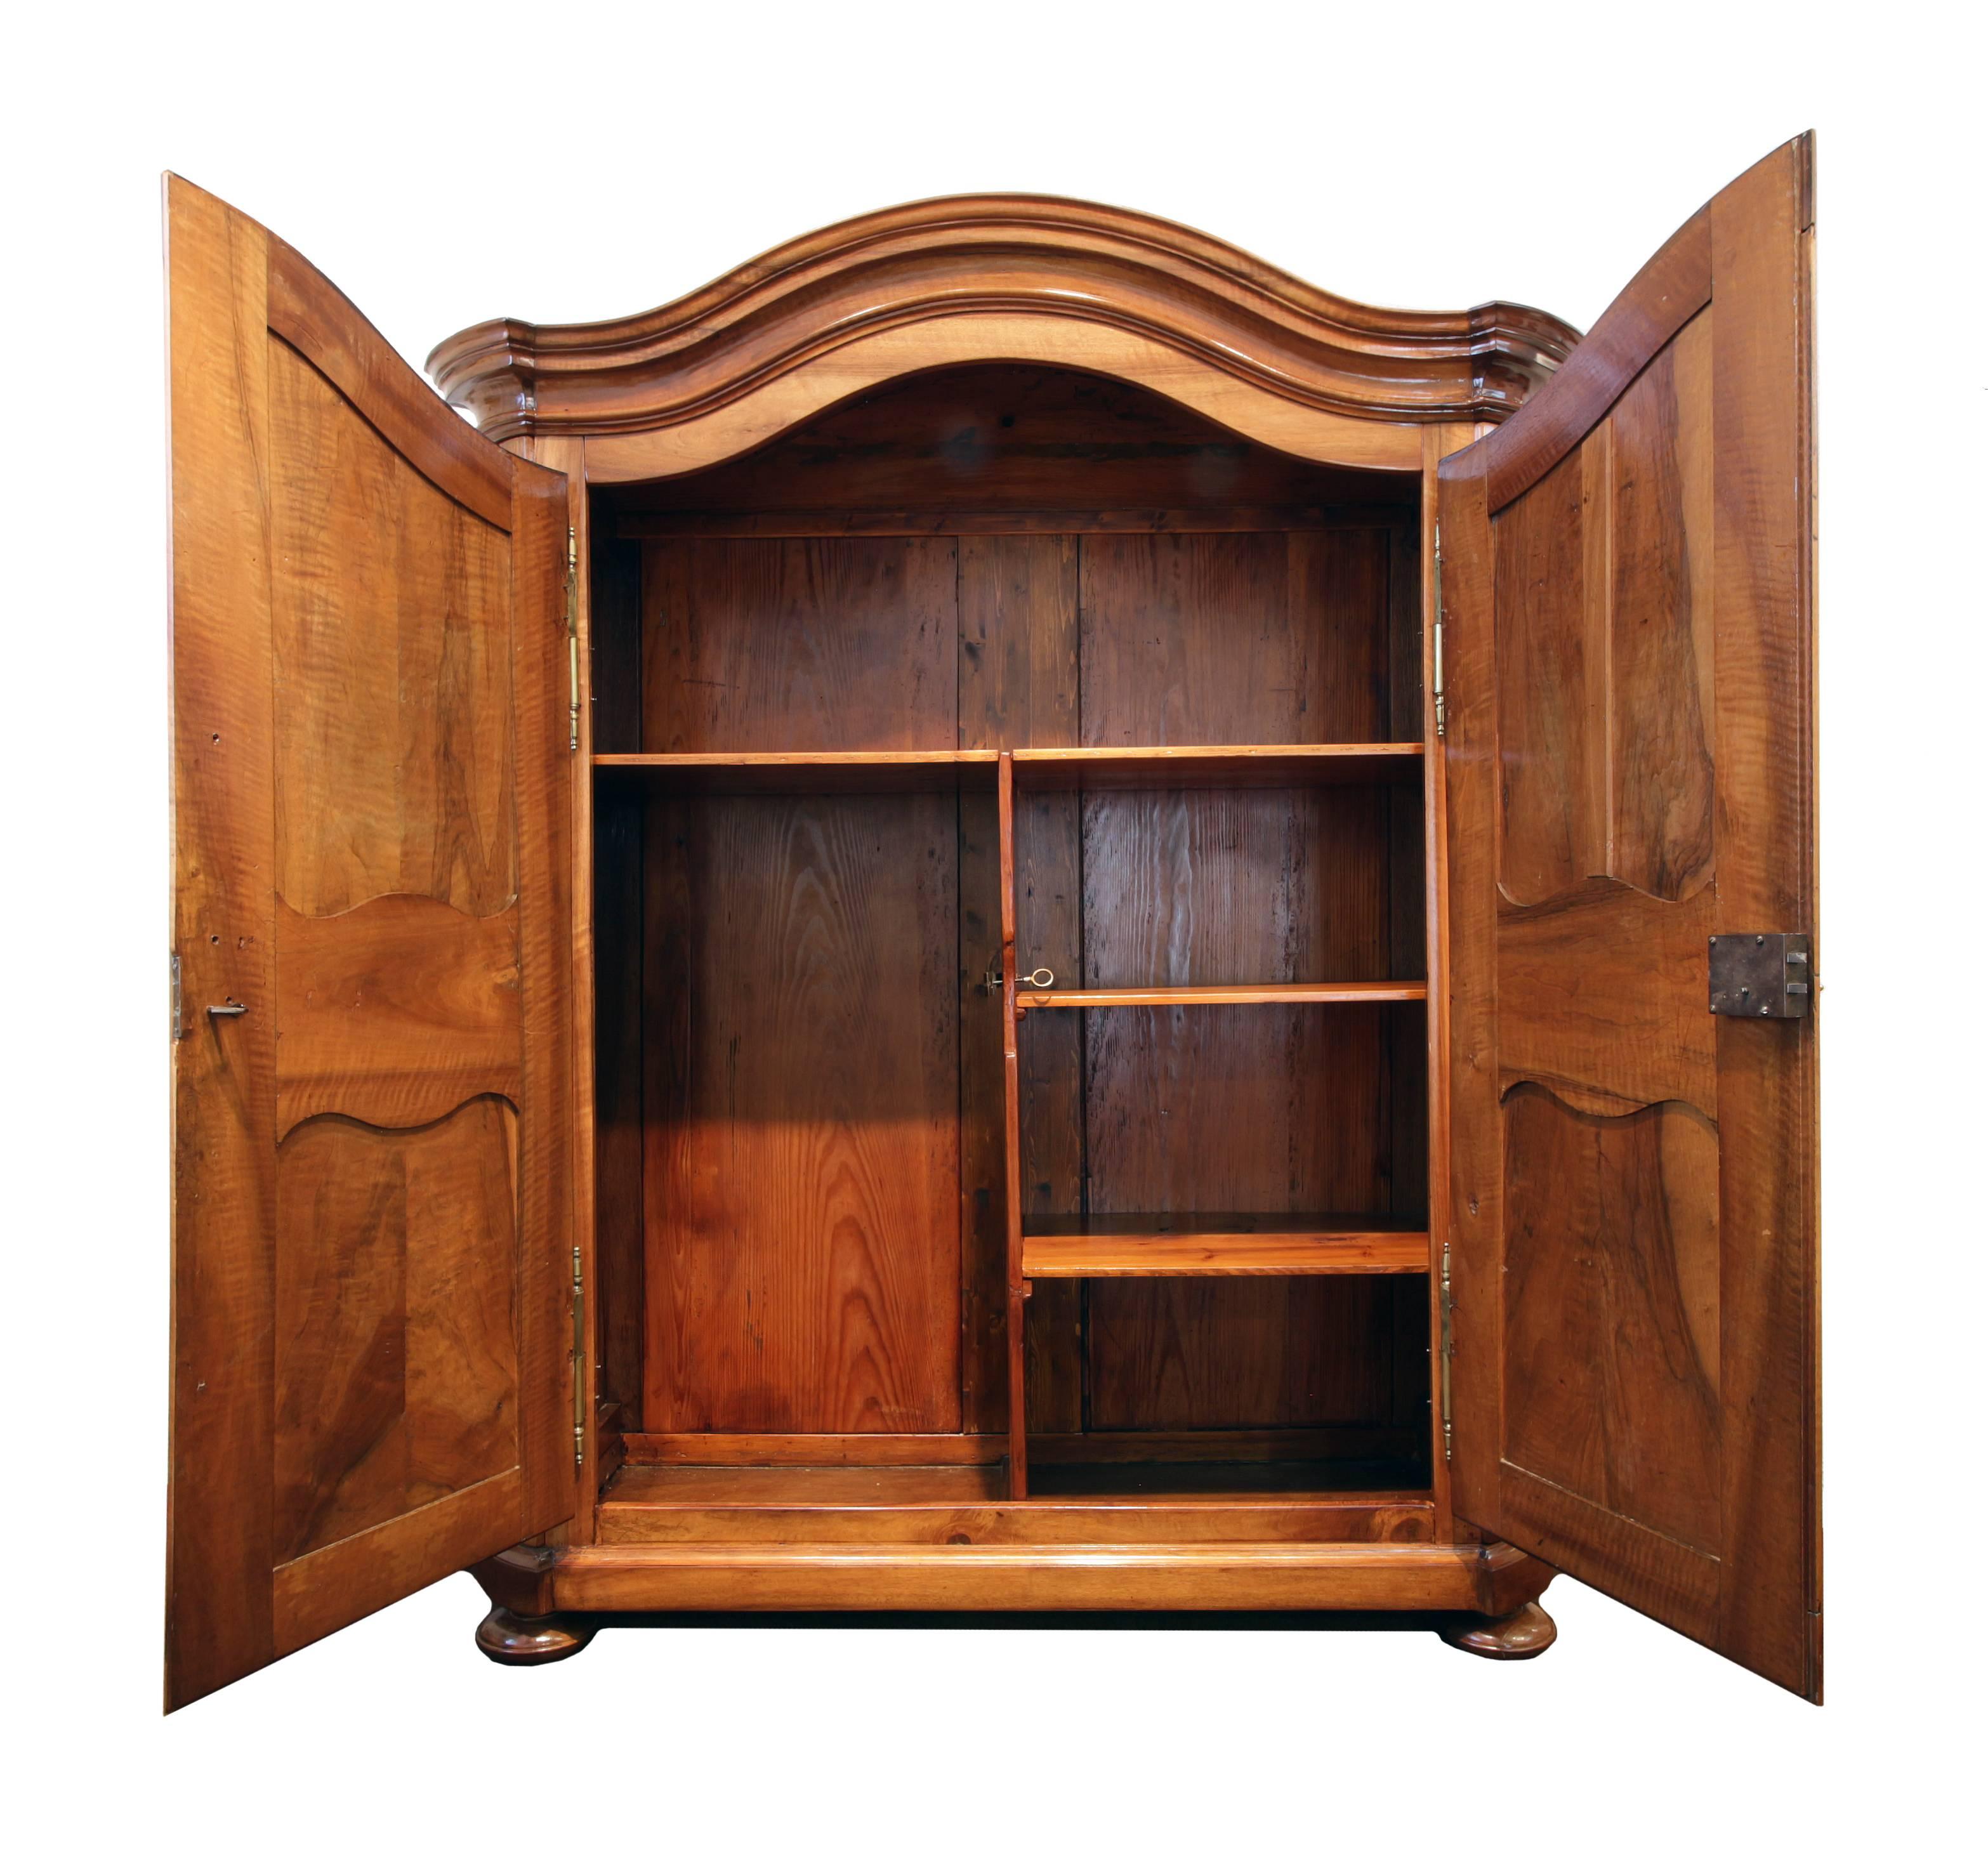 Very beautiful Baroque wardrobe made of solid walnut. Backboard and interior division consists of pinewood, as usual. The closet is in a very good restored condition. The interior is available as you can see in the photo. If desired, the interior